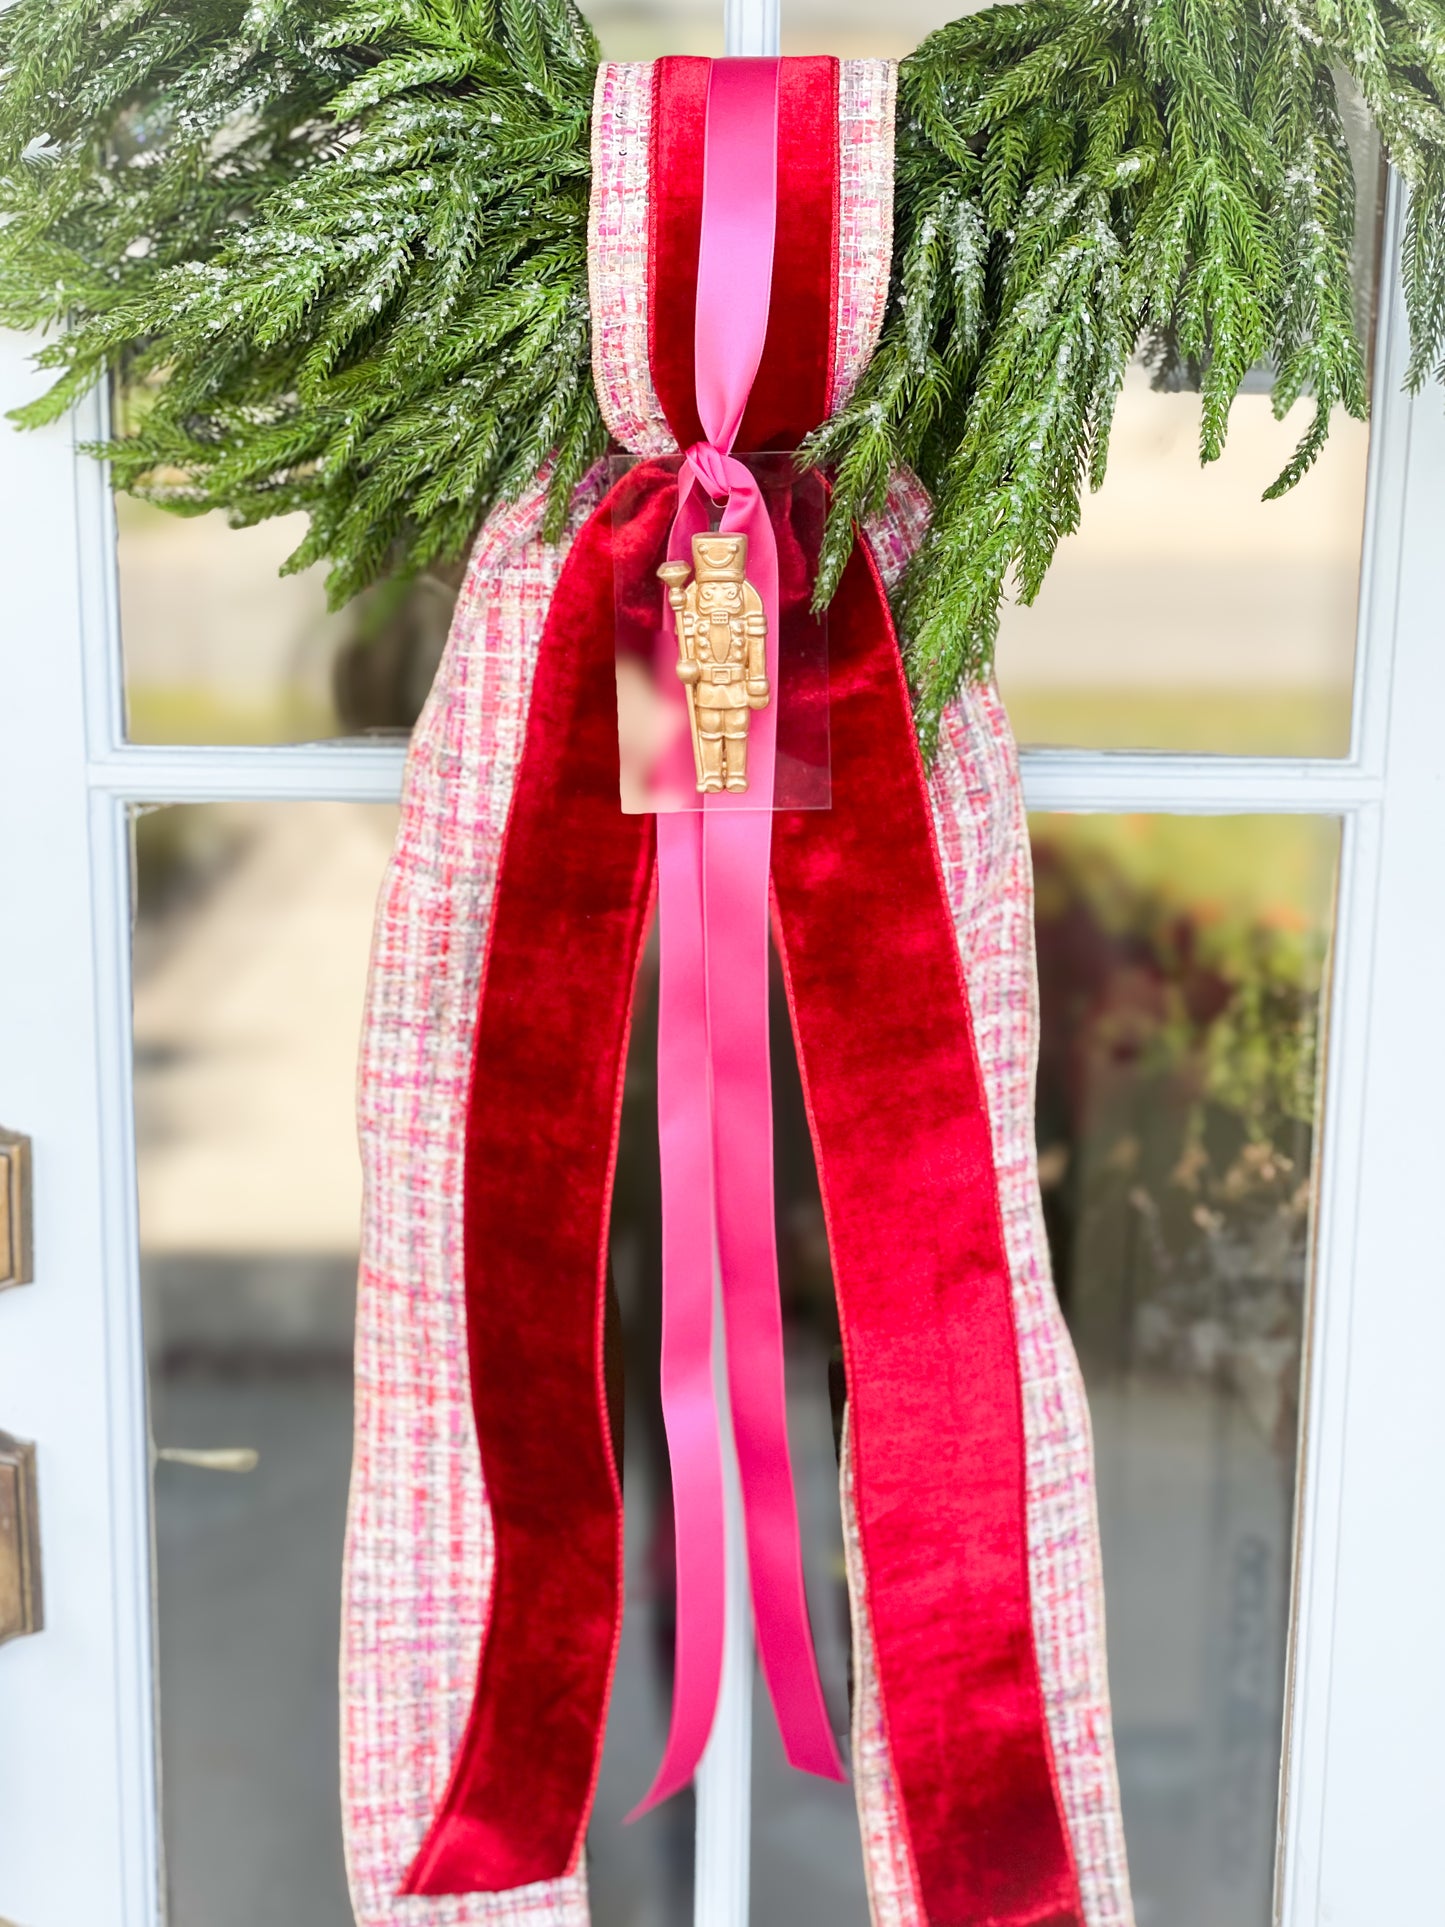 Tweed The Night Before Christmas Wreath With Sash And Acrylic Nutcracker Ornament